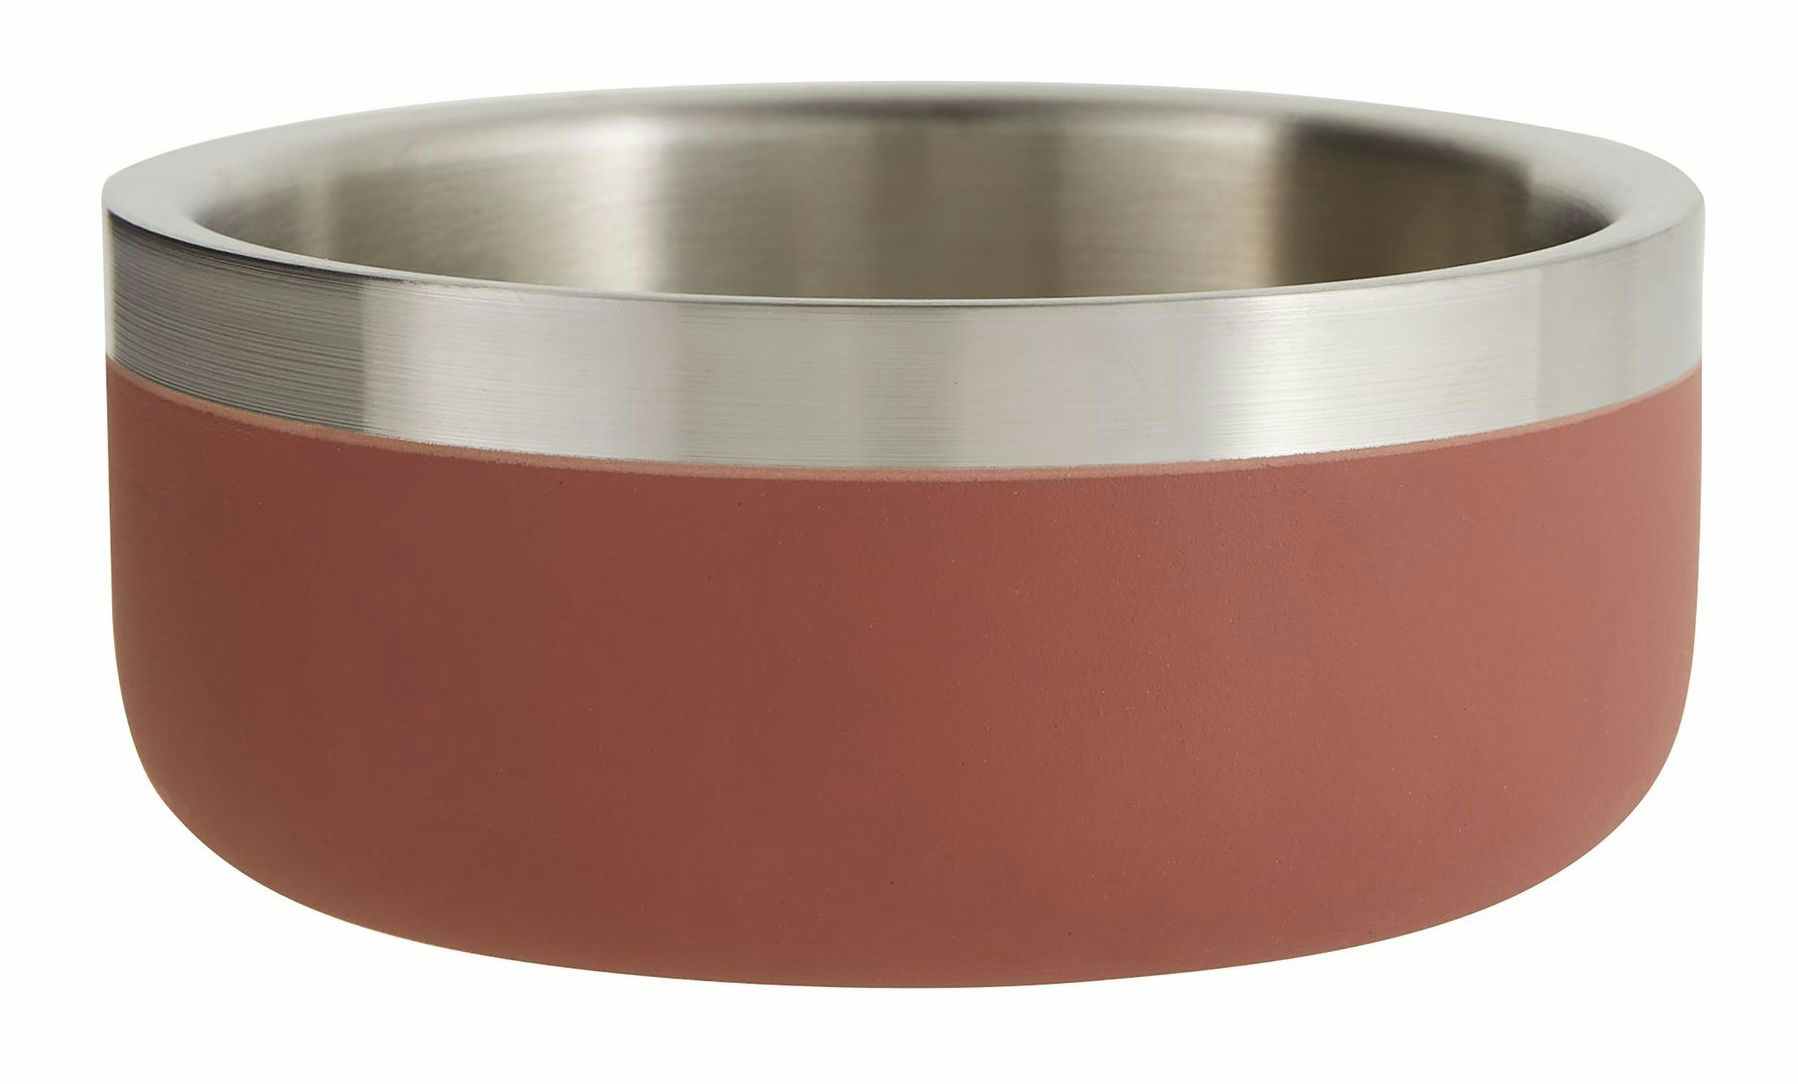 a red stainless steel insulated dog bowl